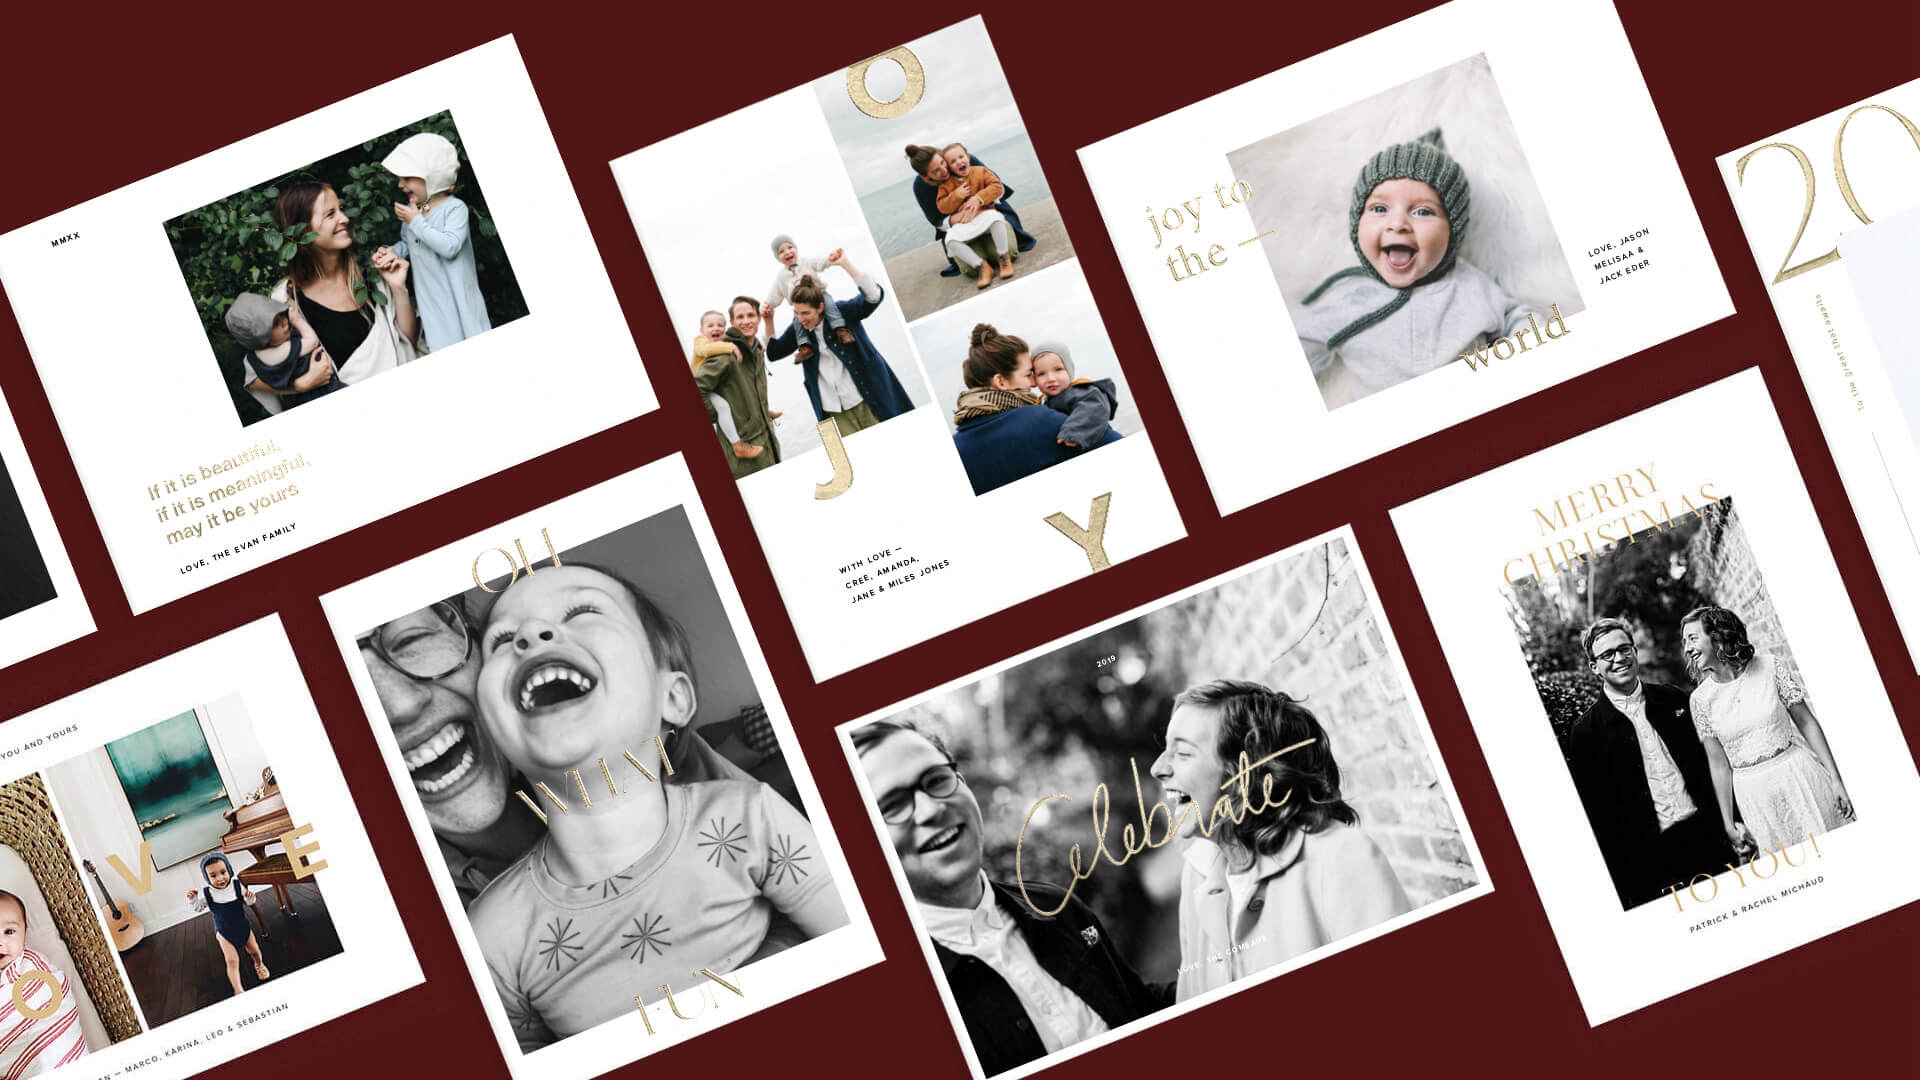 9 Creative Holiday Photo Ideas For Cards | Artifact Uprising For Holiday Card Templates For Photographers